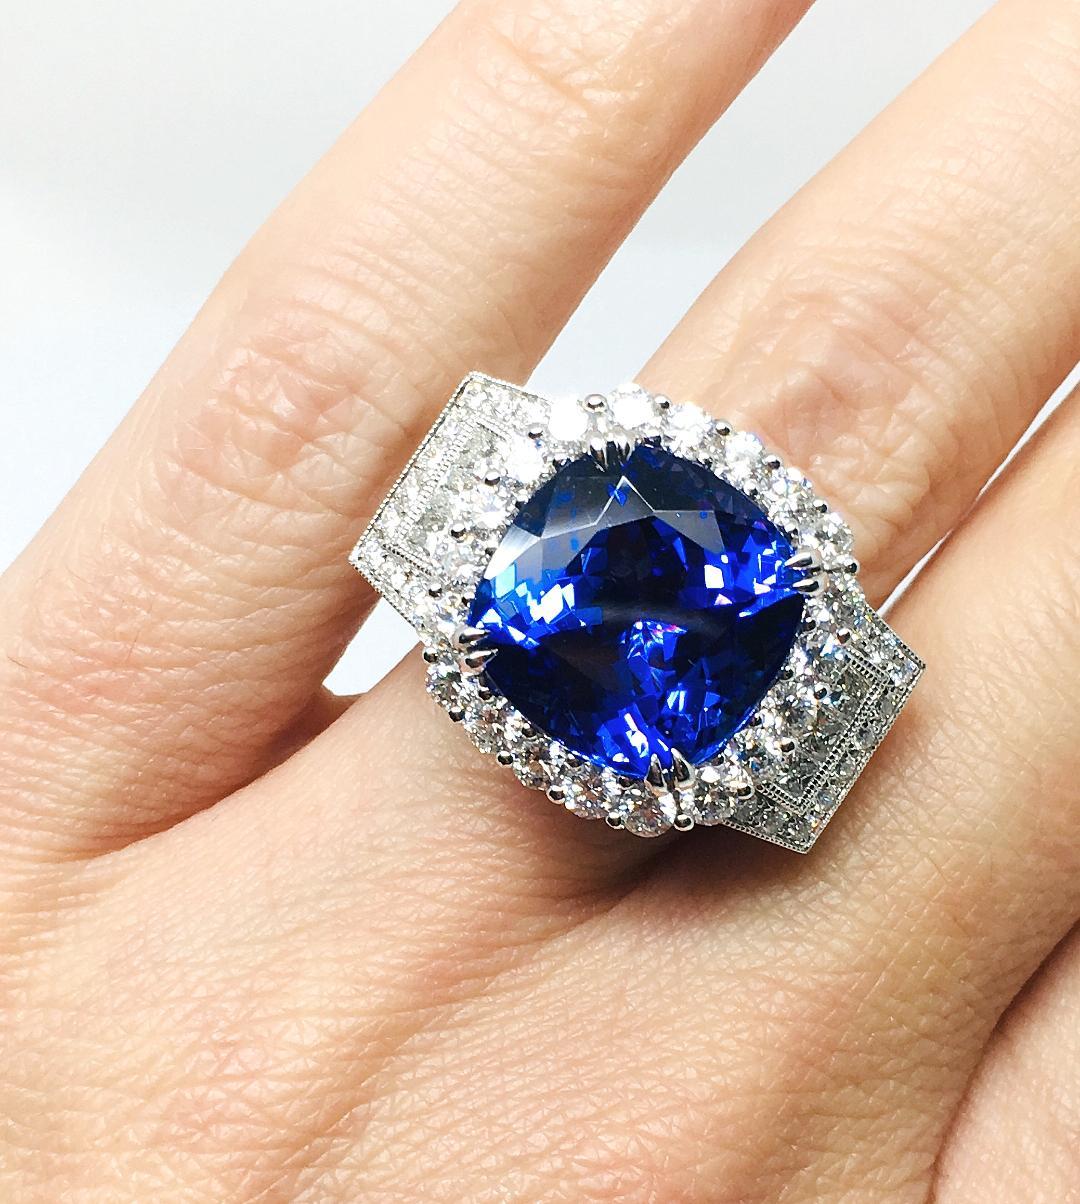 METAL: White Gold
METAL PURITY: 18k
TANZANITE: 12.33 Total Carat Weight
64 R Diamonds :  1.75 Carat Weight
6 P Diamonds : 0.35 Carat Weight
COLOR : F
CLARITY : VS2
SIZE: 7 
COMES WITH AUTHENTICITY PAPERS.